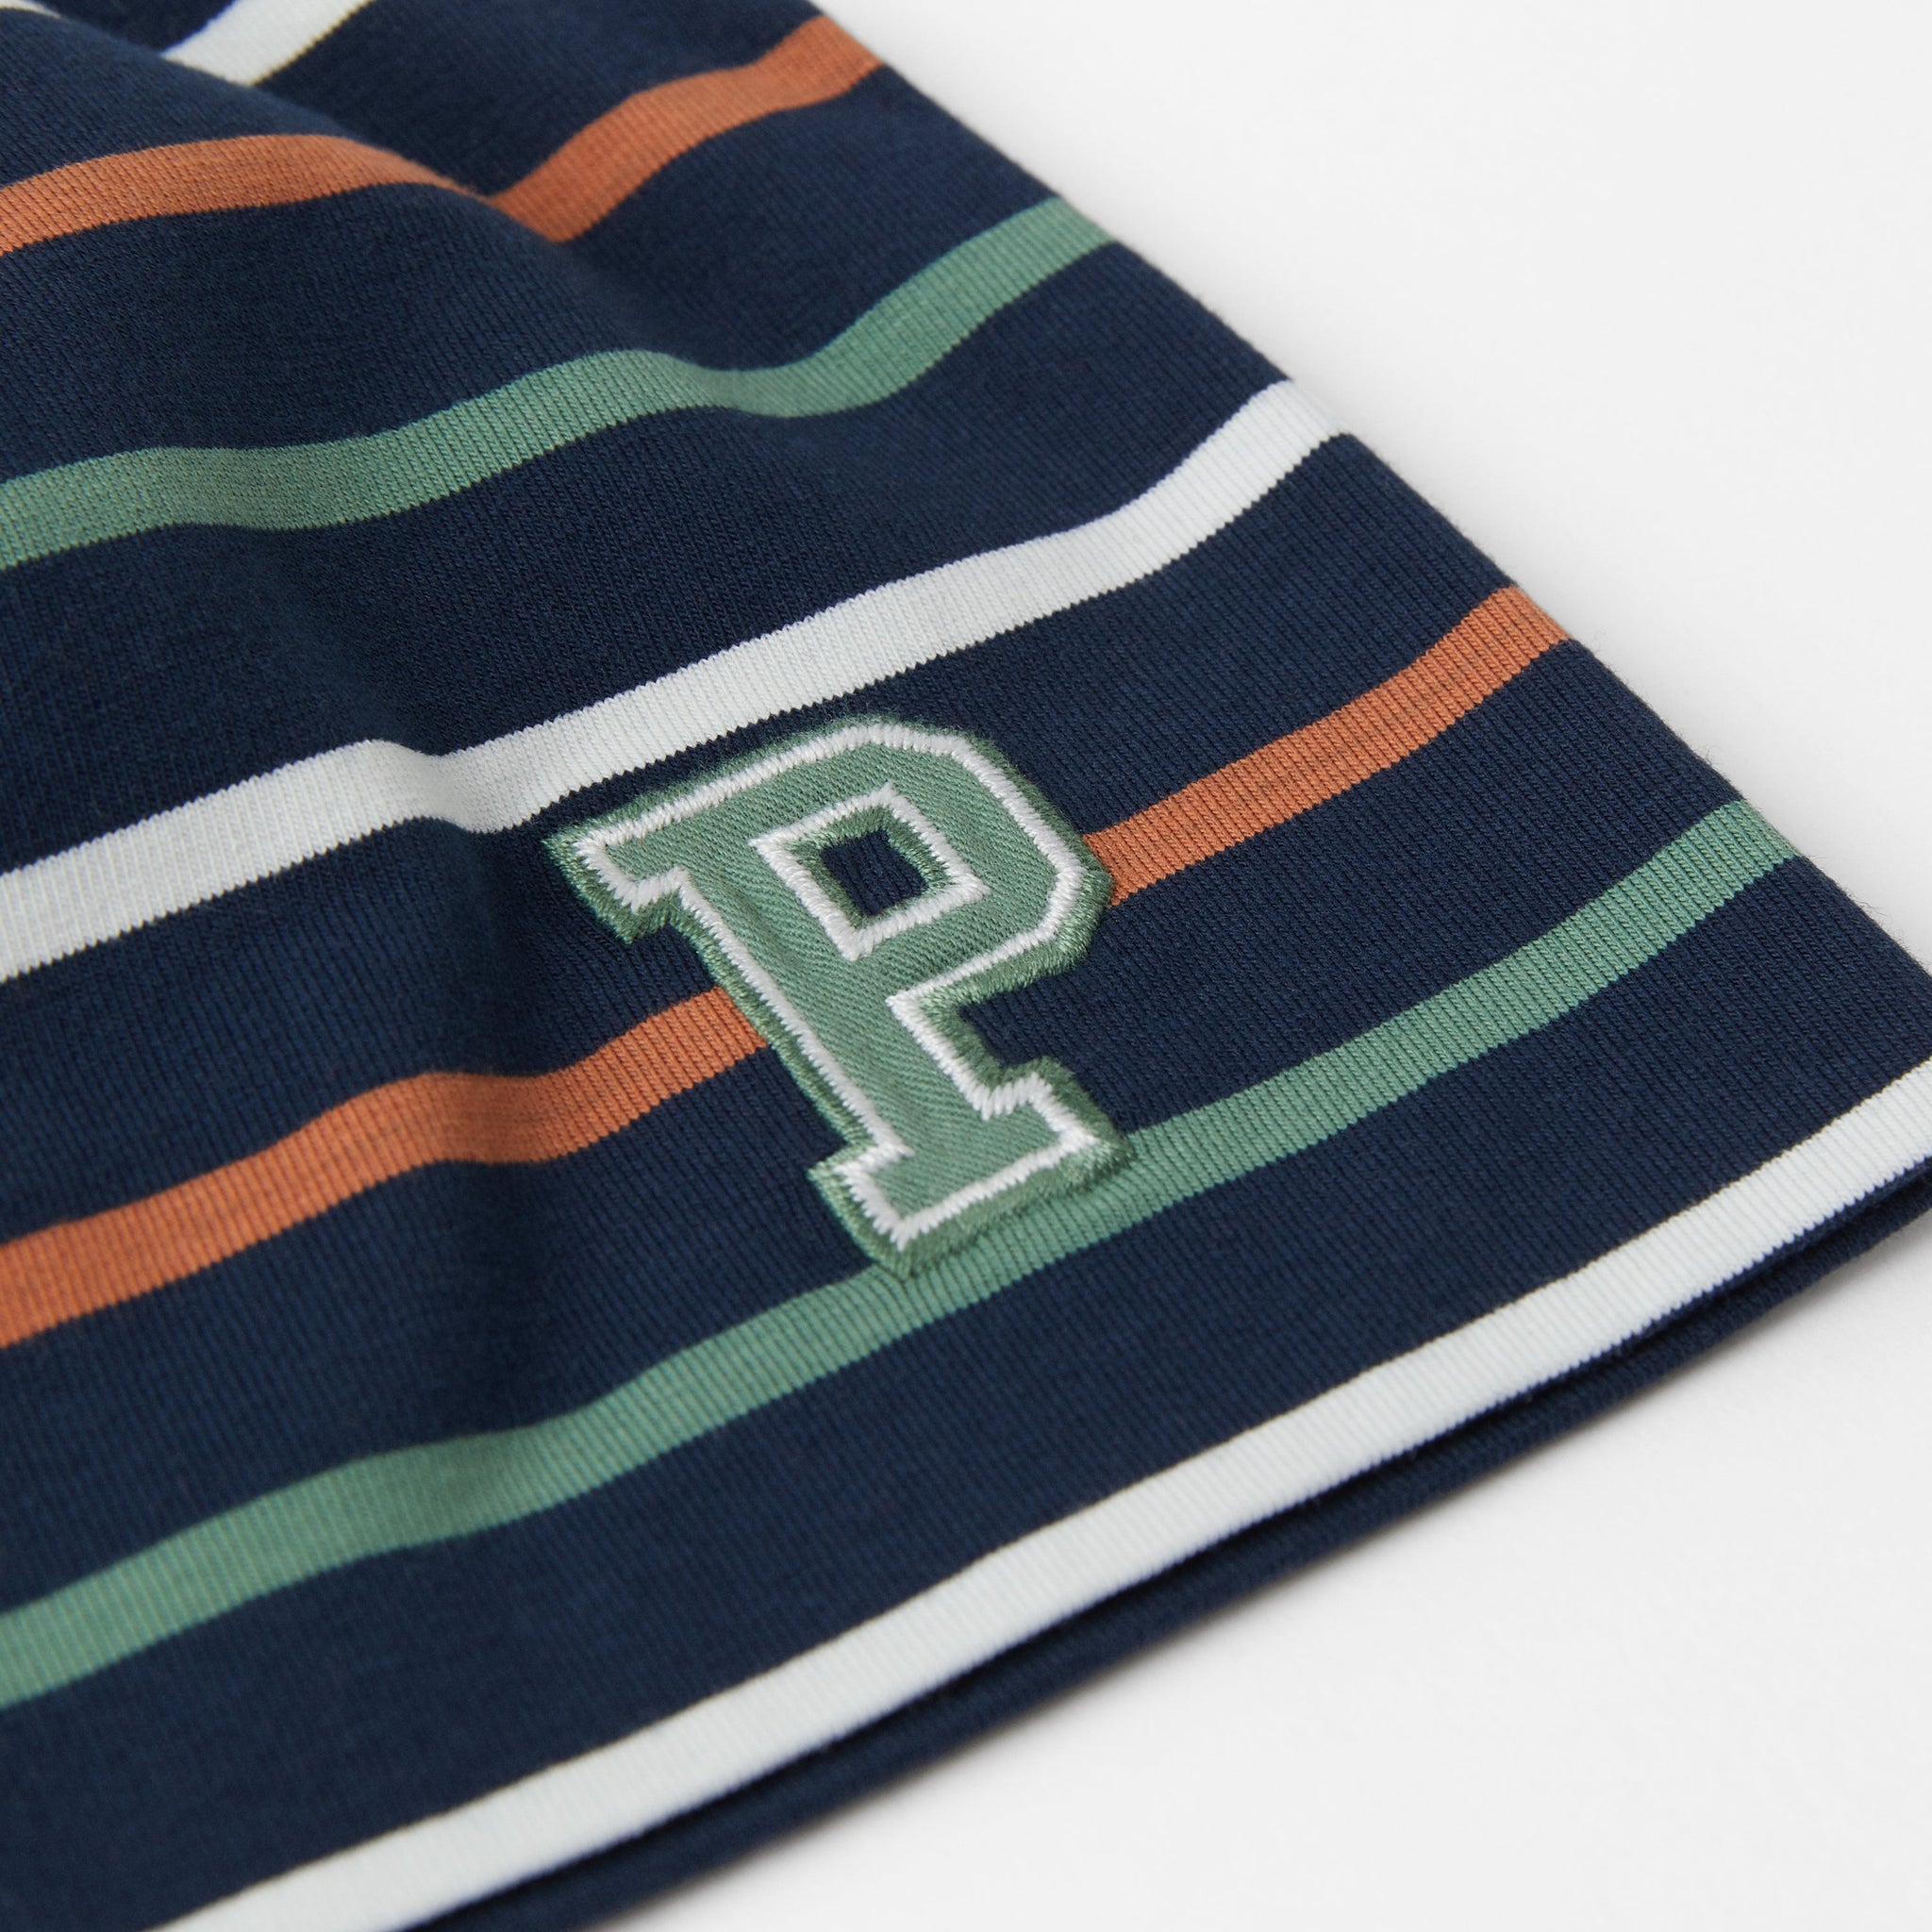 Striped Navy Kids Beanie Hat from the Polarn O. Pyret kidswear collection. Ethically produced kids outerwear.